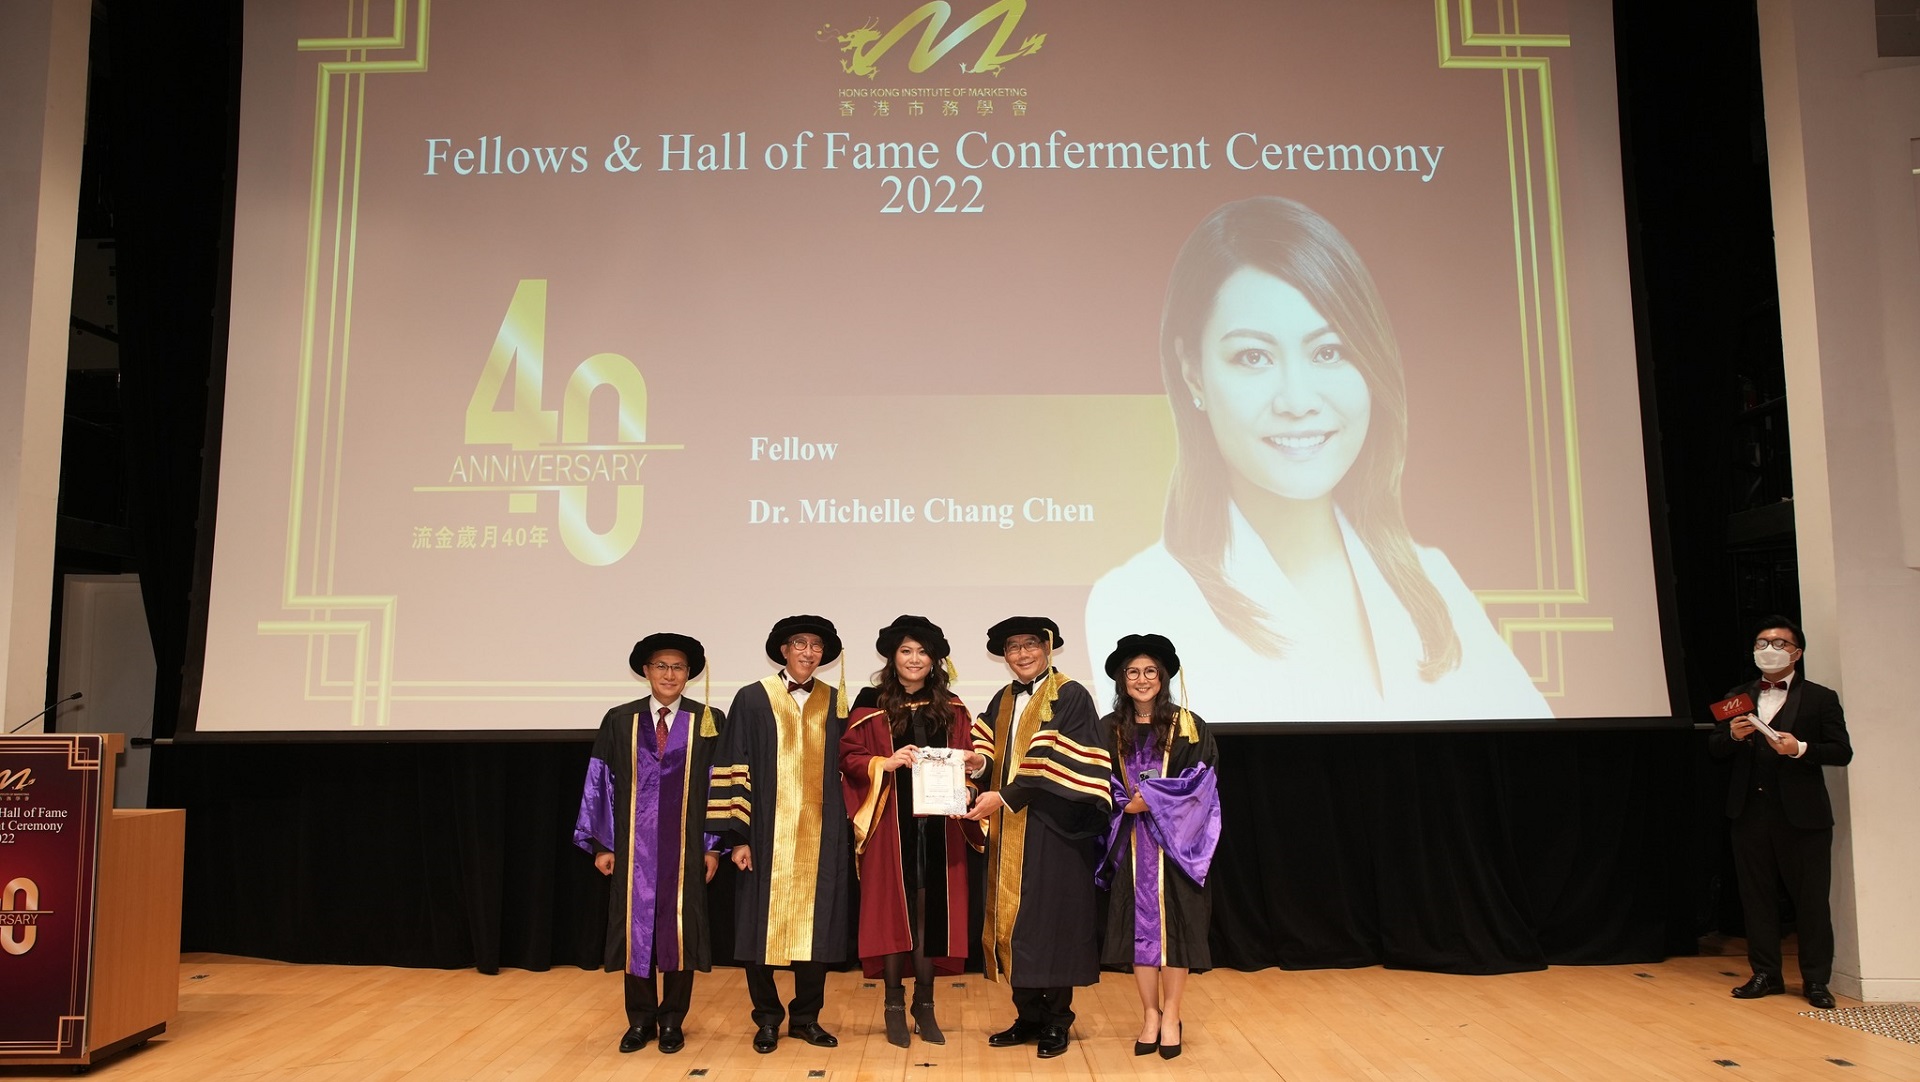 Fellows & Hall of Fame Conferment Ceremony 2022